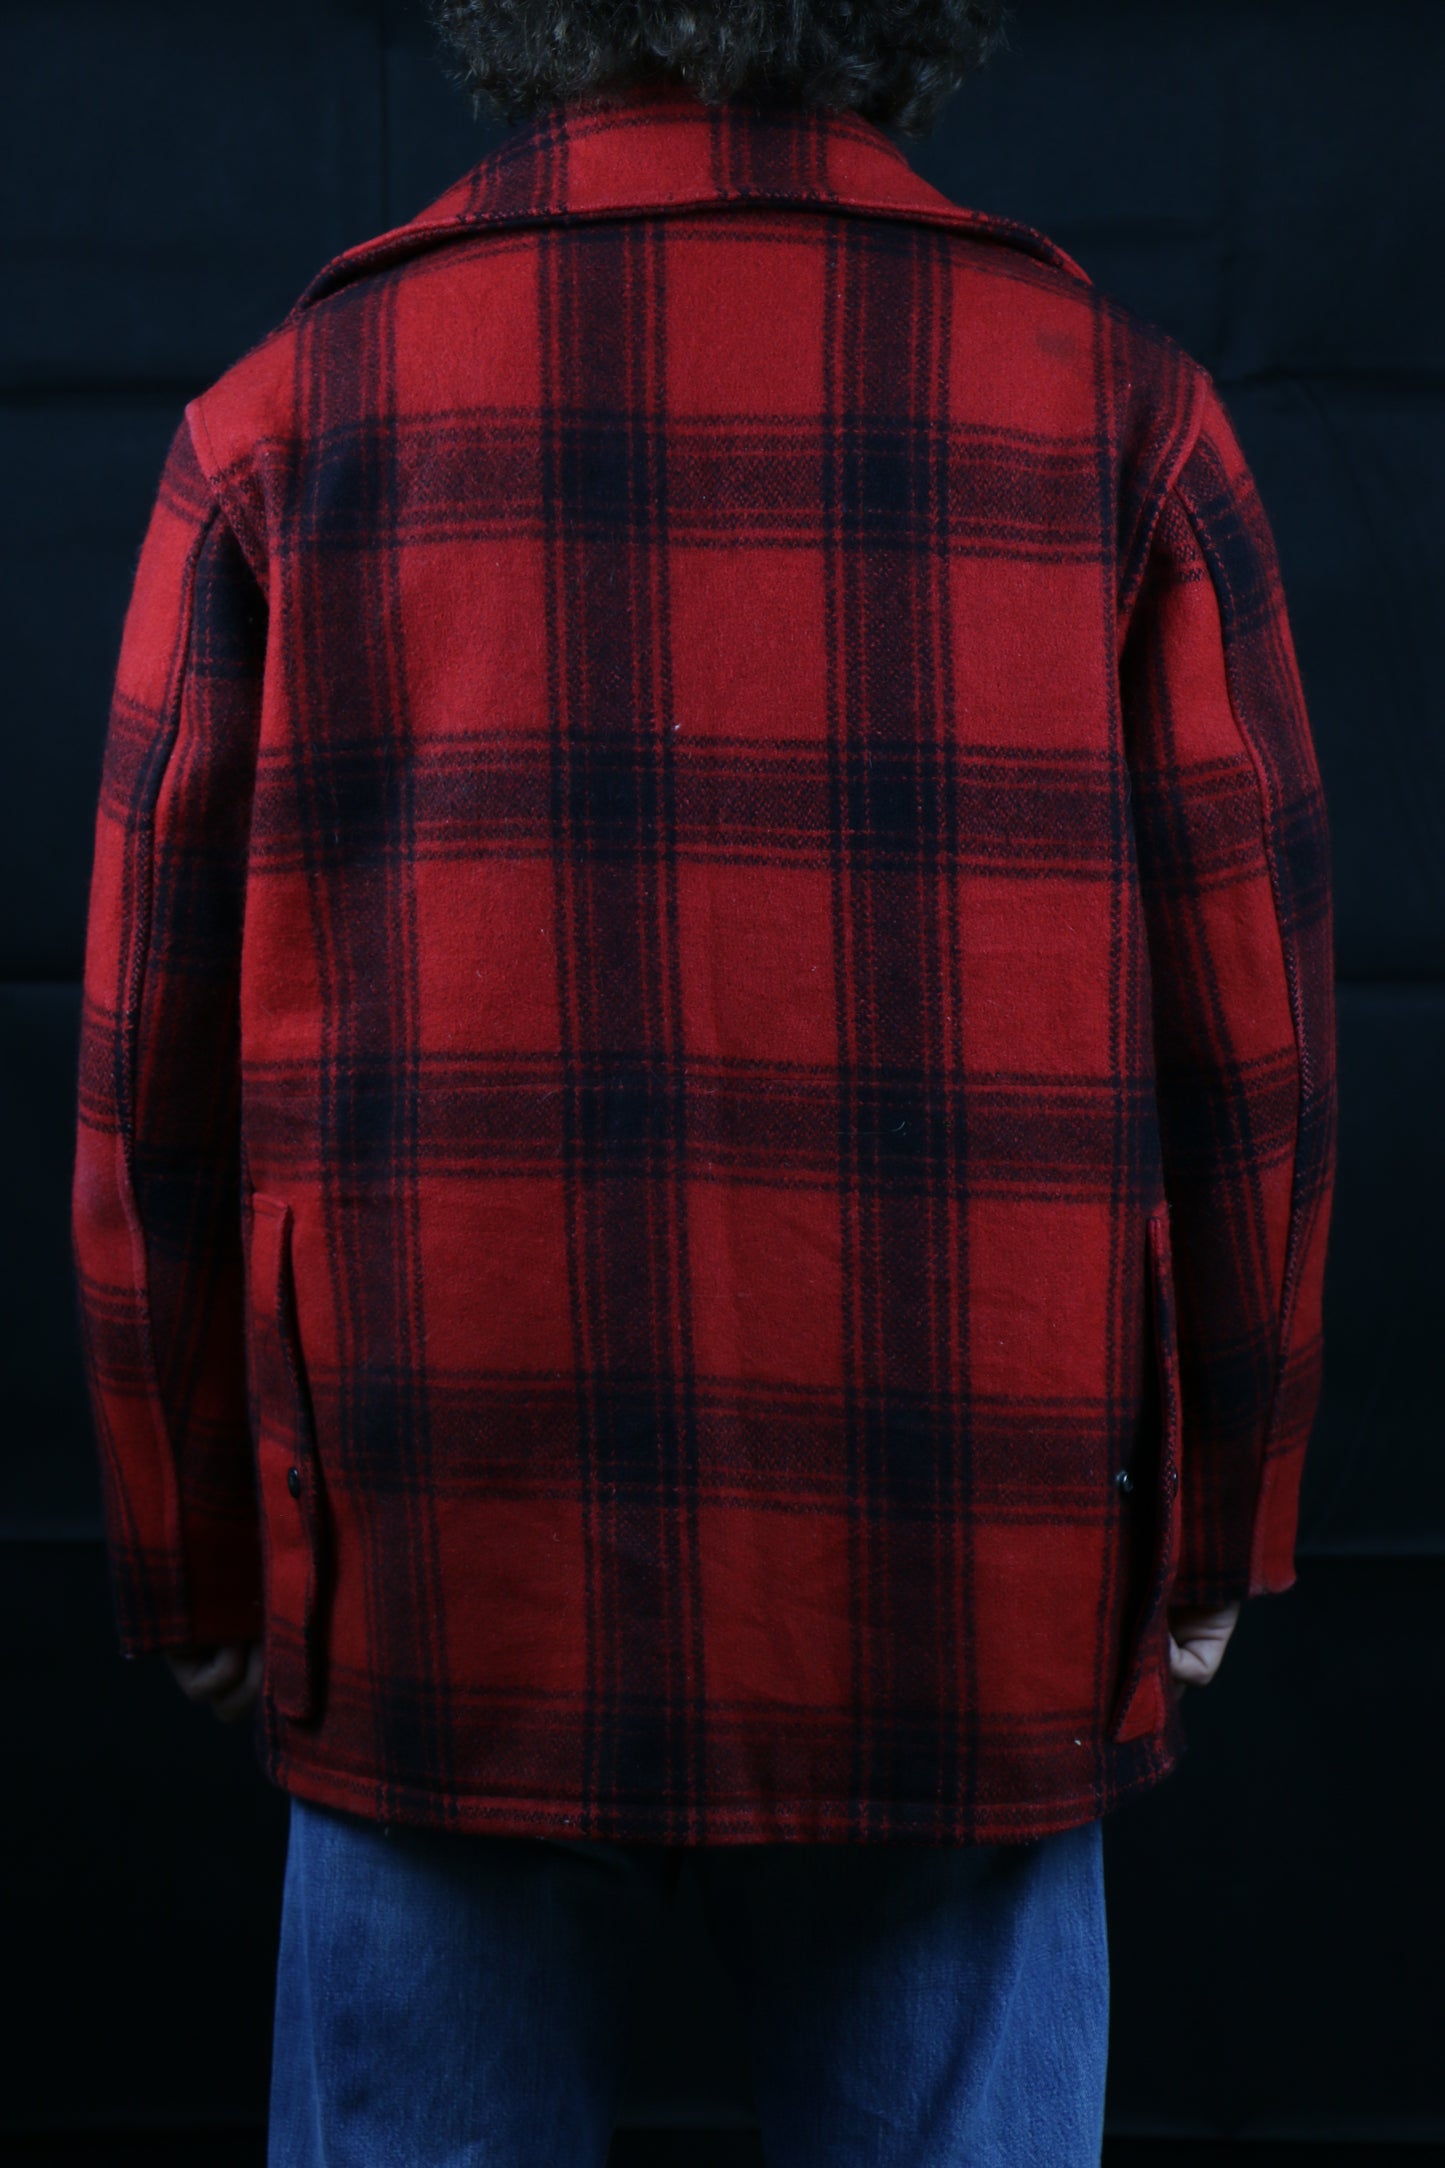 Foremost JC Penny Red Plaid Hunting Jacket 50s, clochard92.com